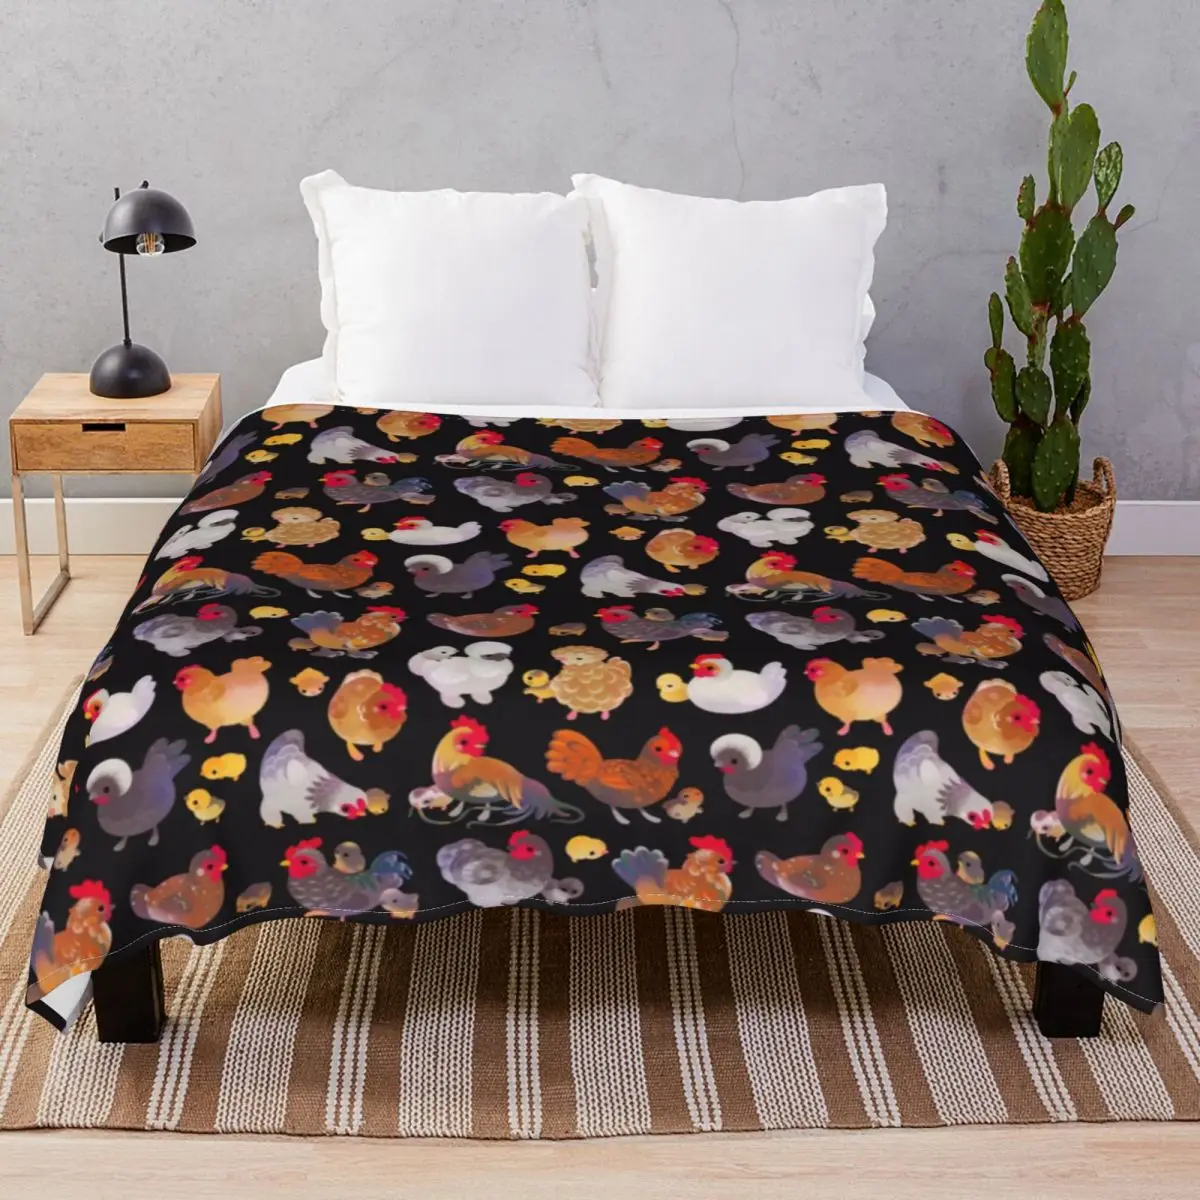 Chicken And Chick Dark Blankets Fleece Decoration Warm Throw Blanket for Bedding Home Couch Camp Office